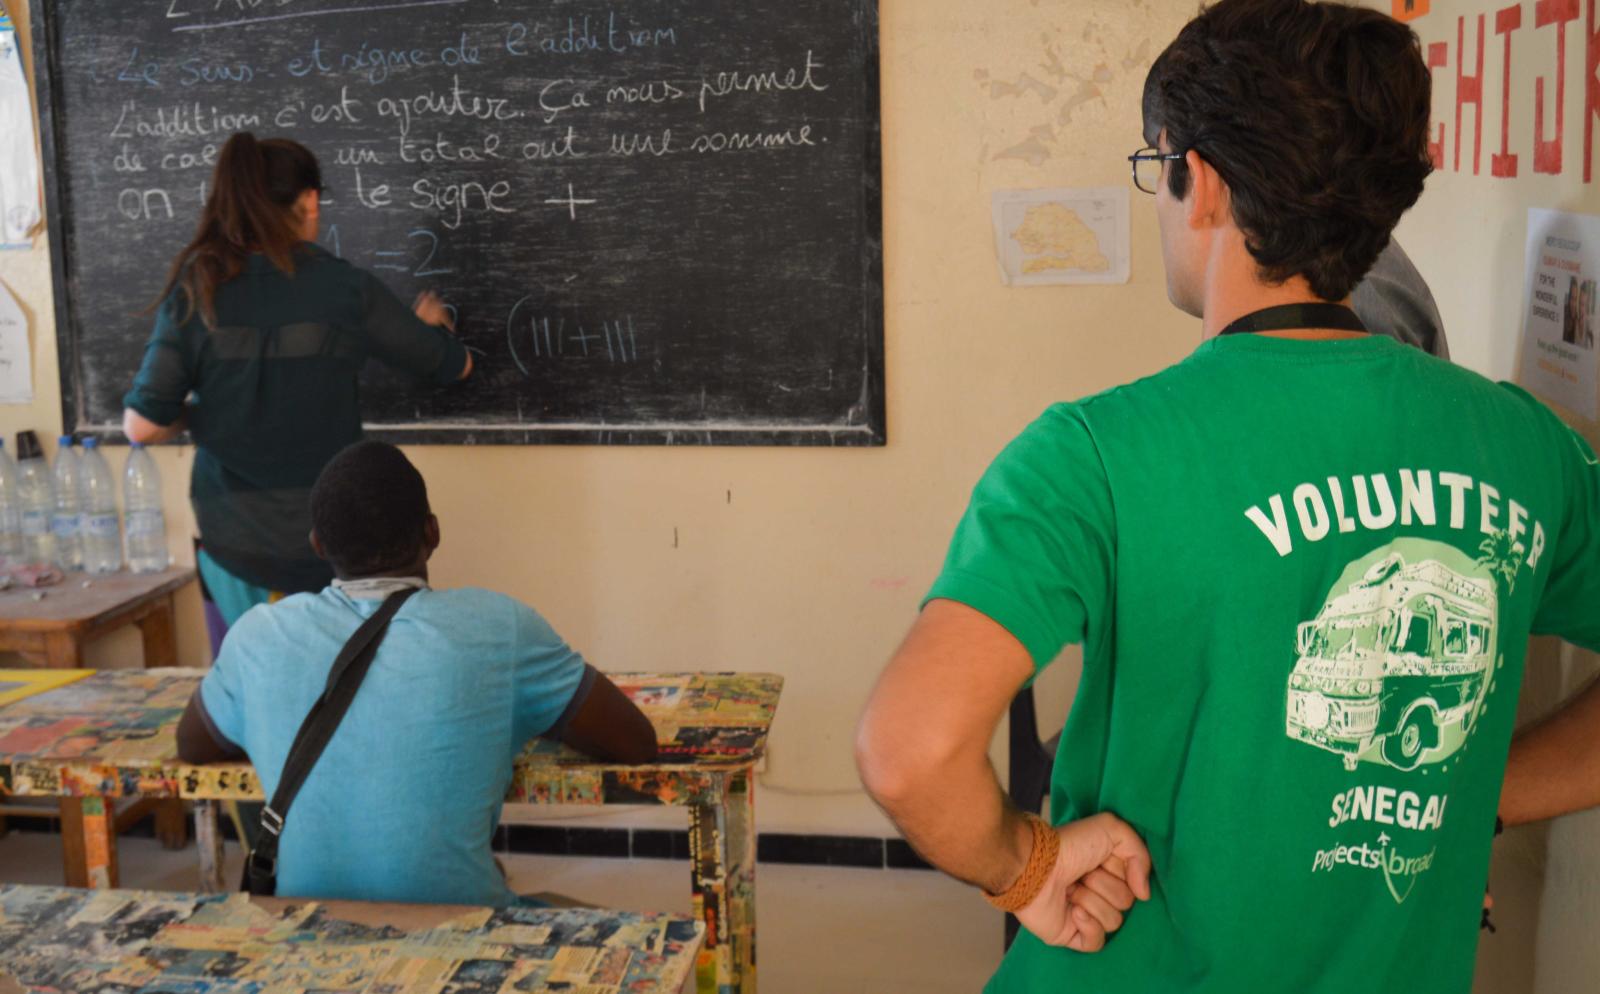 Projects Abroad volunteers provide a local business owner with math lessons in Senegal